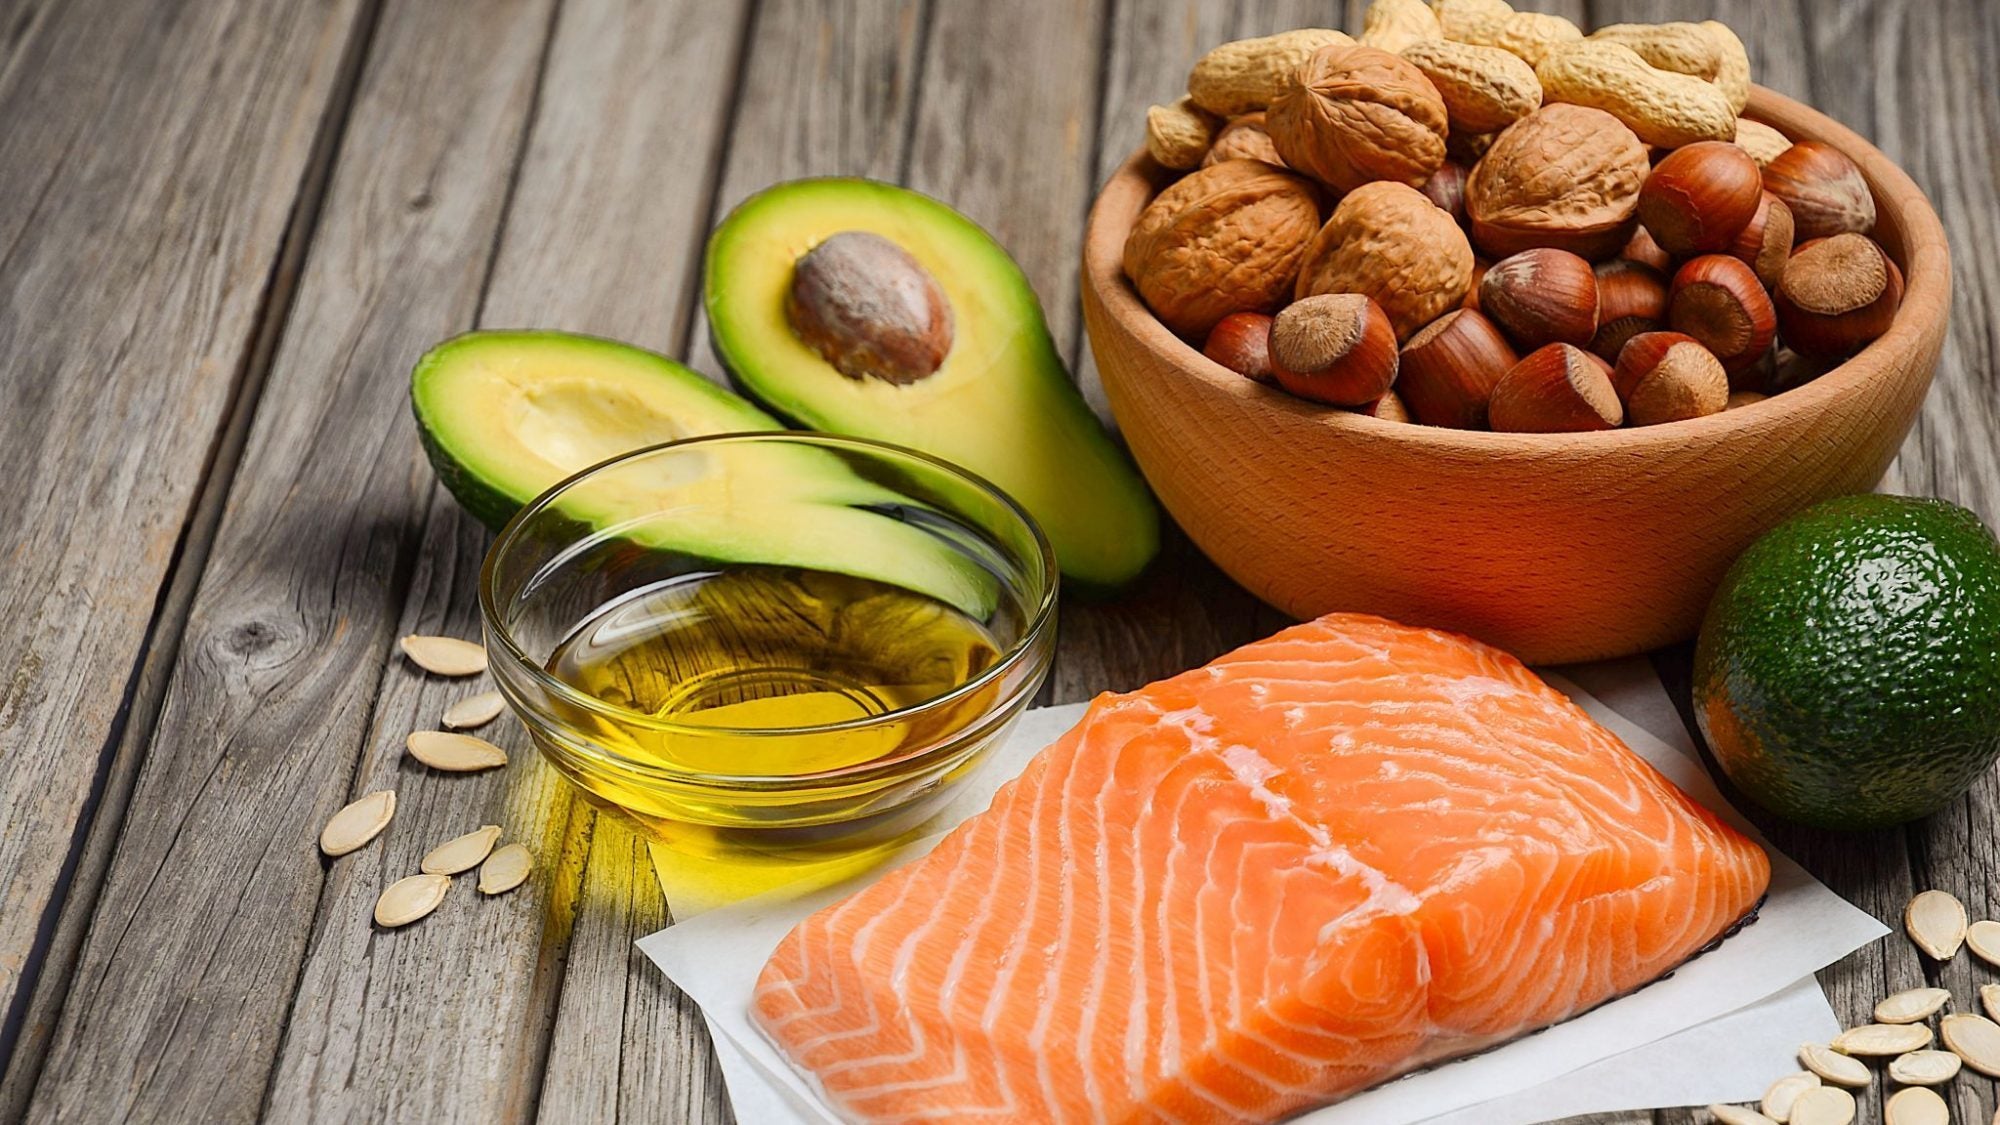 Your Guide to the Pros and Cons of the Keto Diet